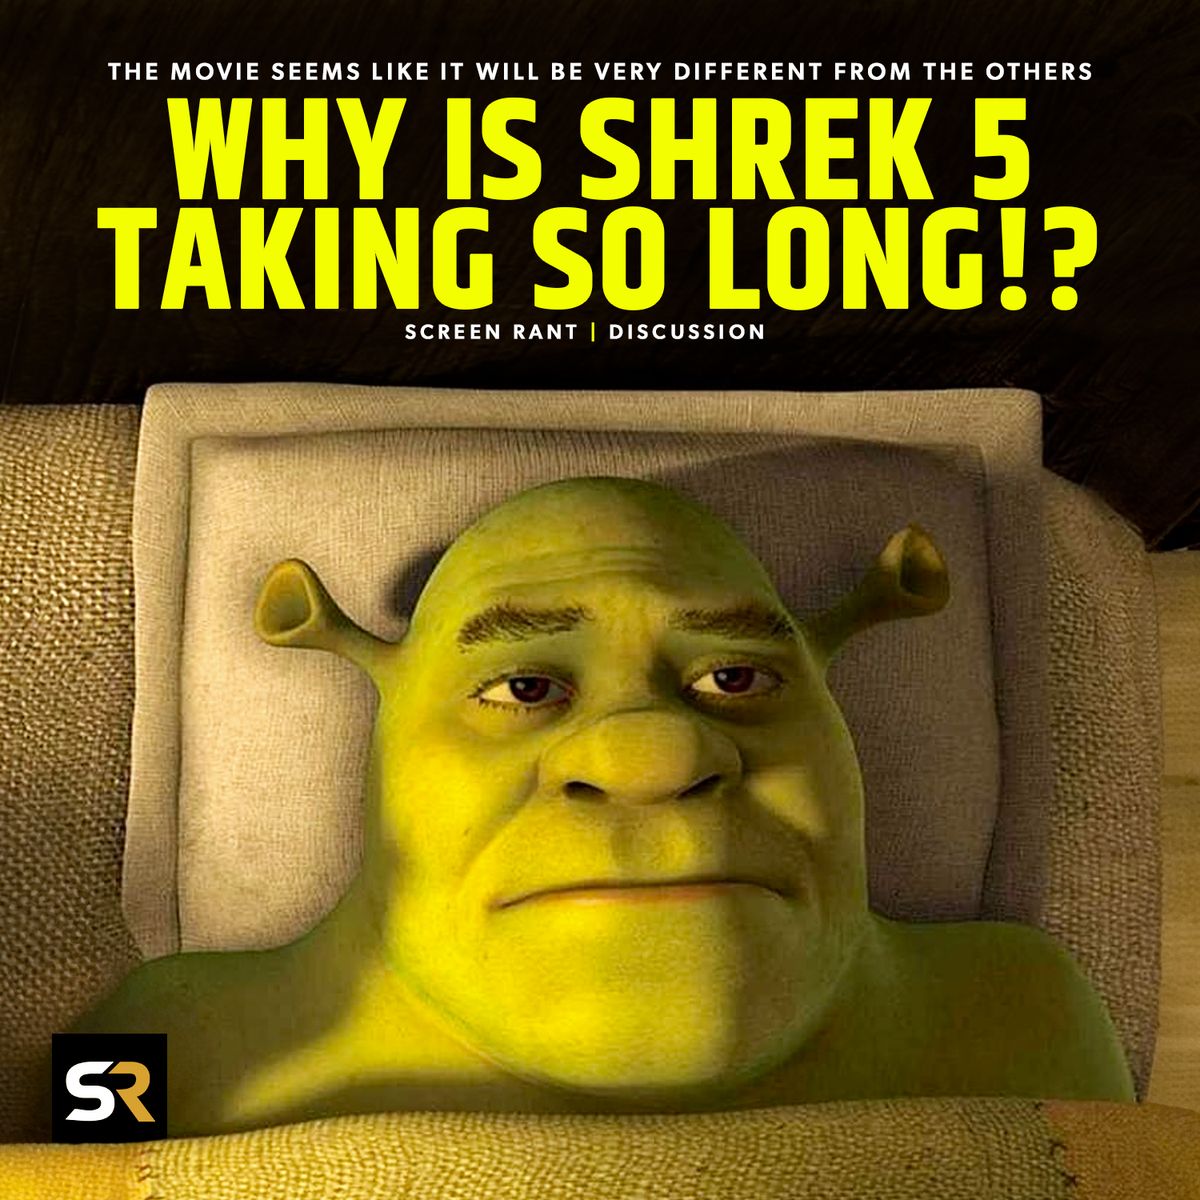 #Shrek 5 has been in development for years with no release date in sight. 😭 With #PussInBoots: The Last Wish taking longer to make than expected, that *may* be why #Shrek5 is taking so long. Also, it has been suggested the movie will be a reboot. 😵 bit.ly/3UTJtR1